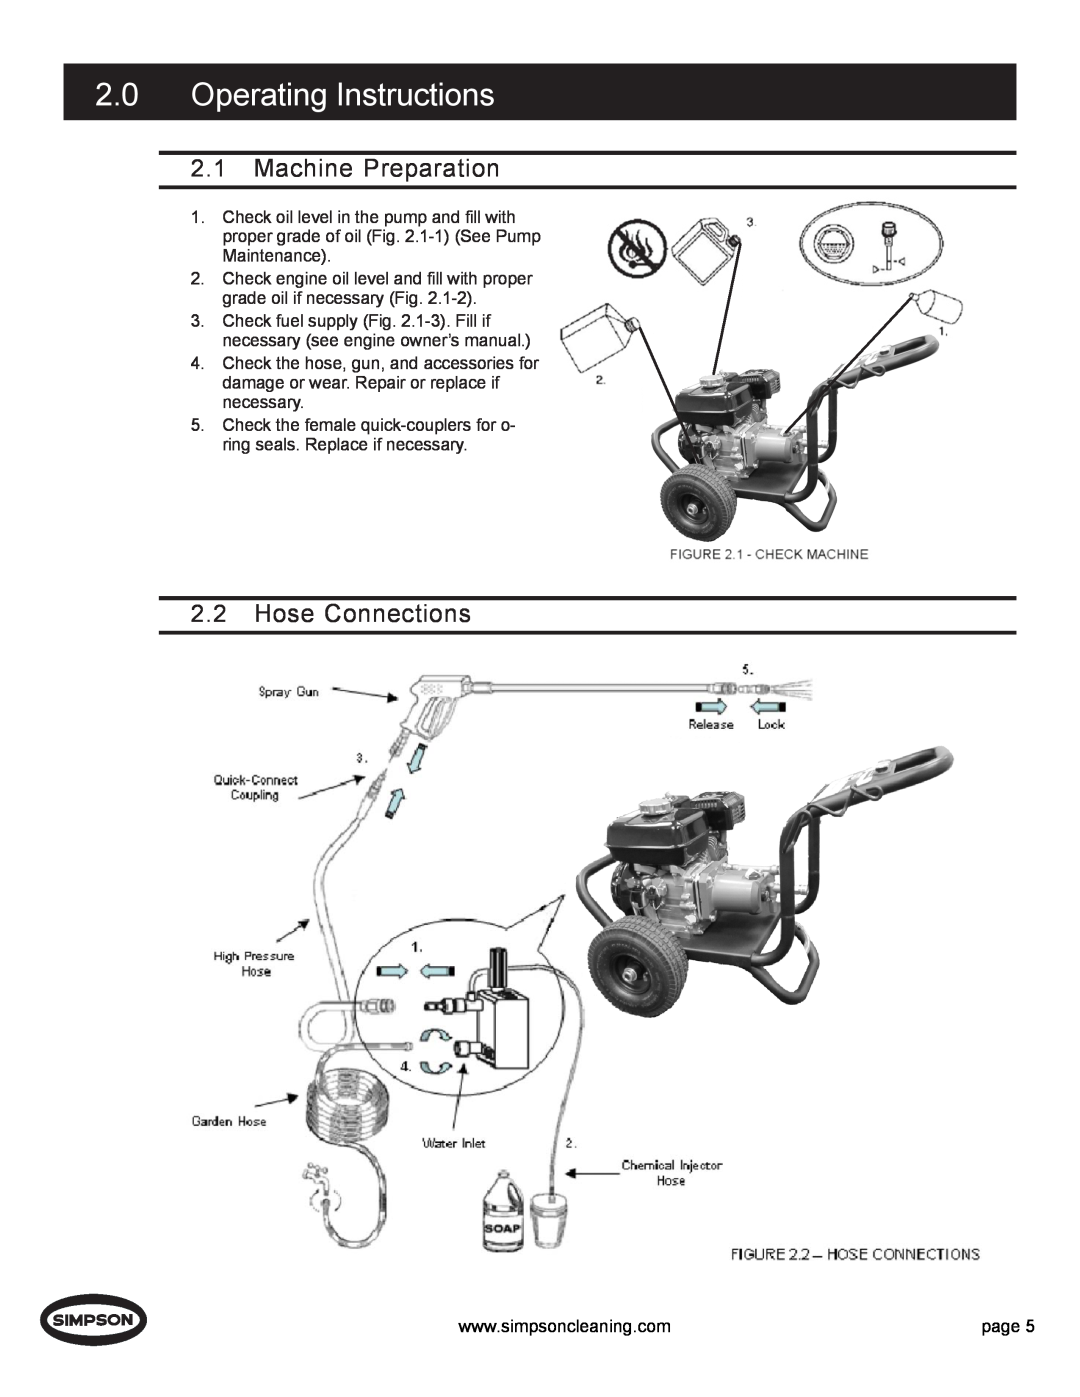 Simpson PS3000 manual 2.0Operating Instructions, 2.1Machine Preparation, 2.2Hose Connections 